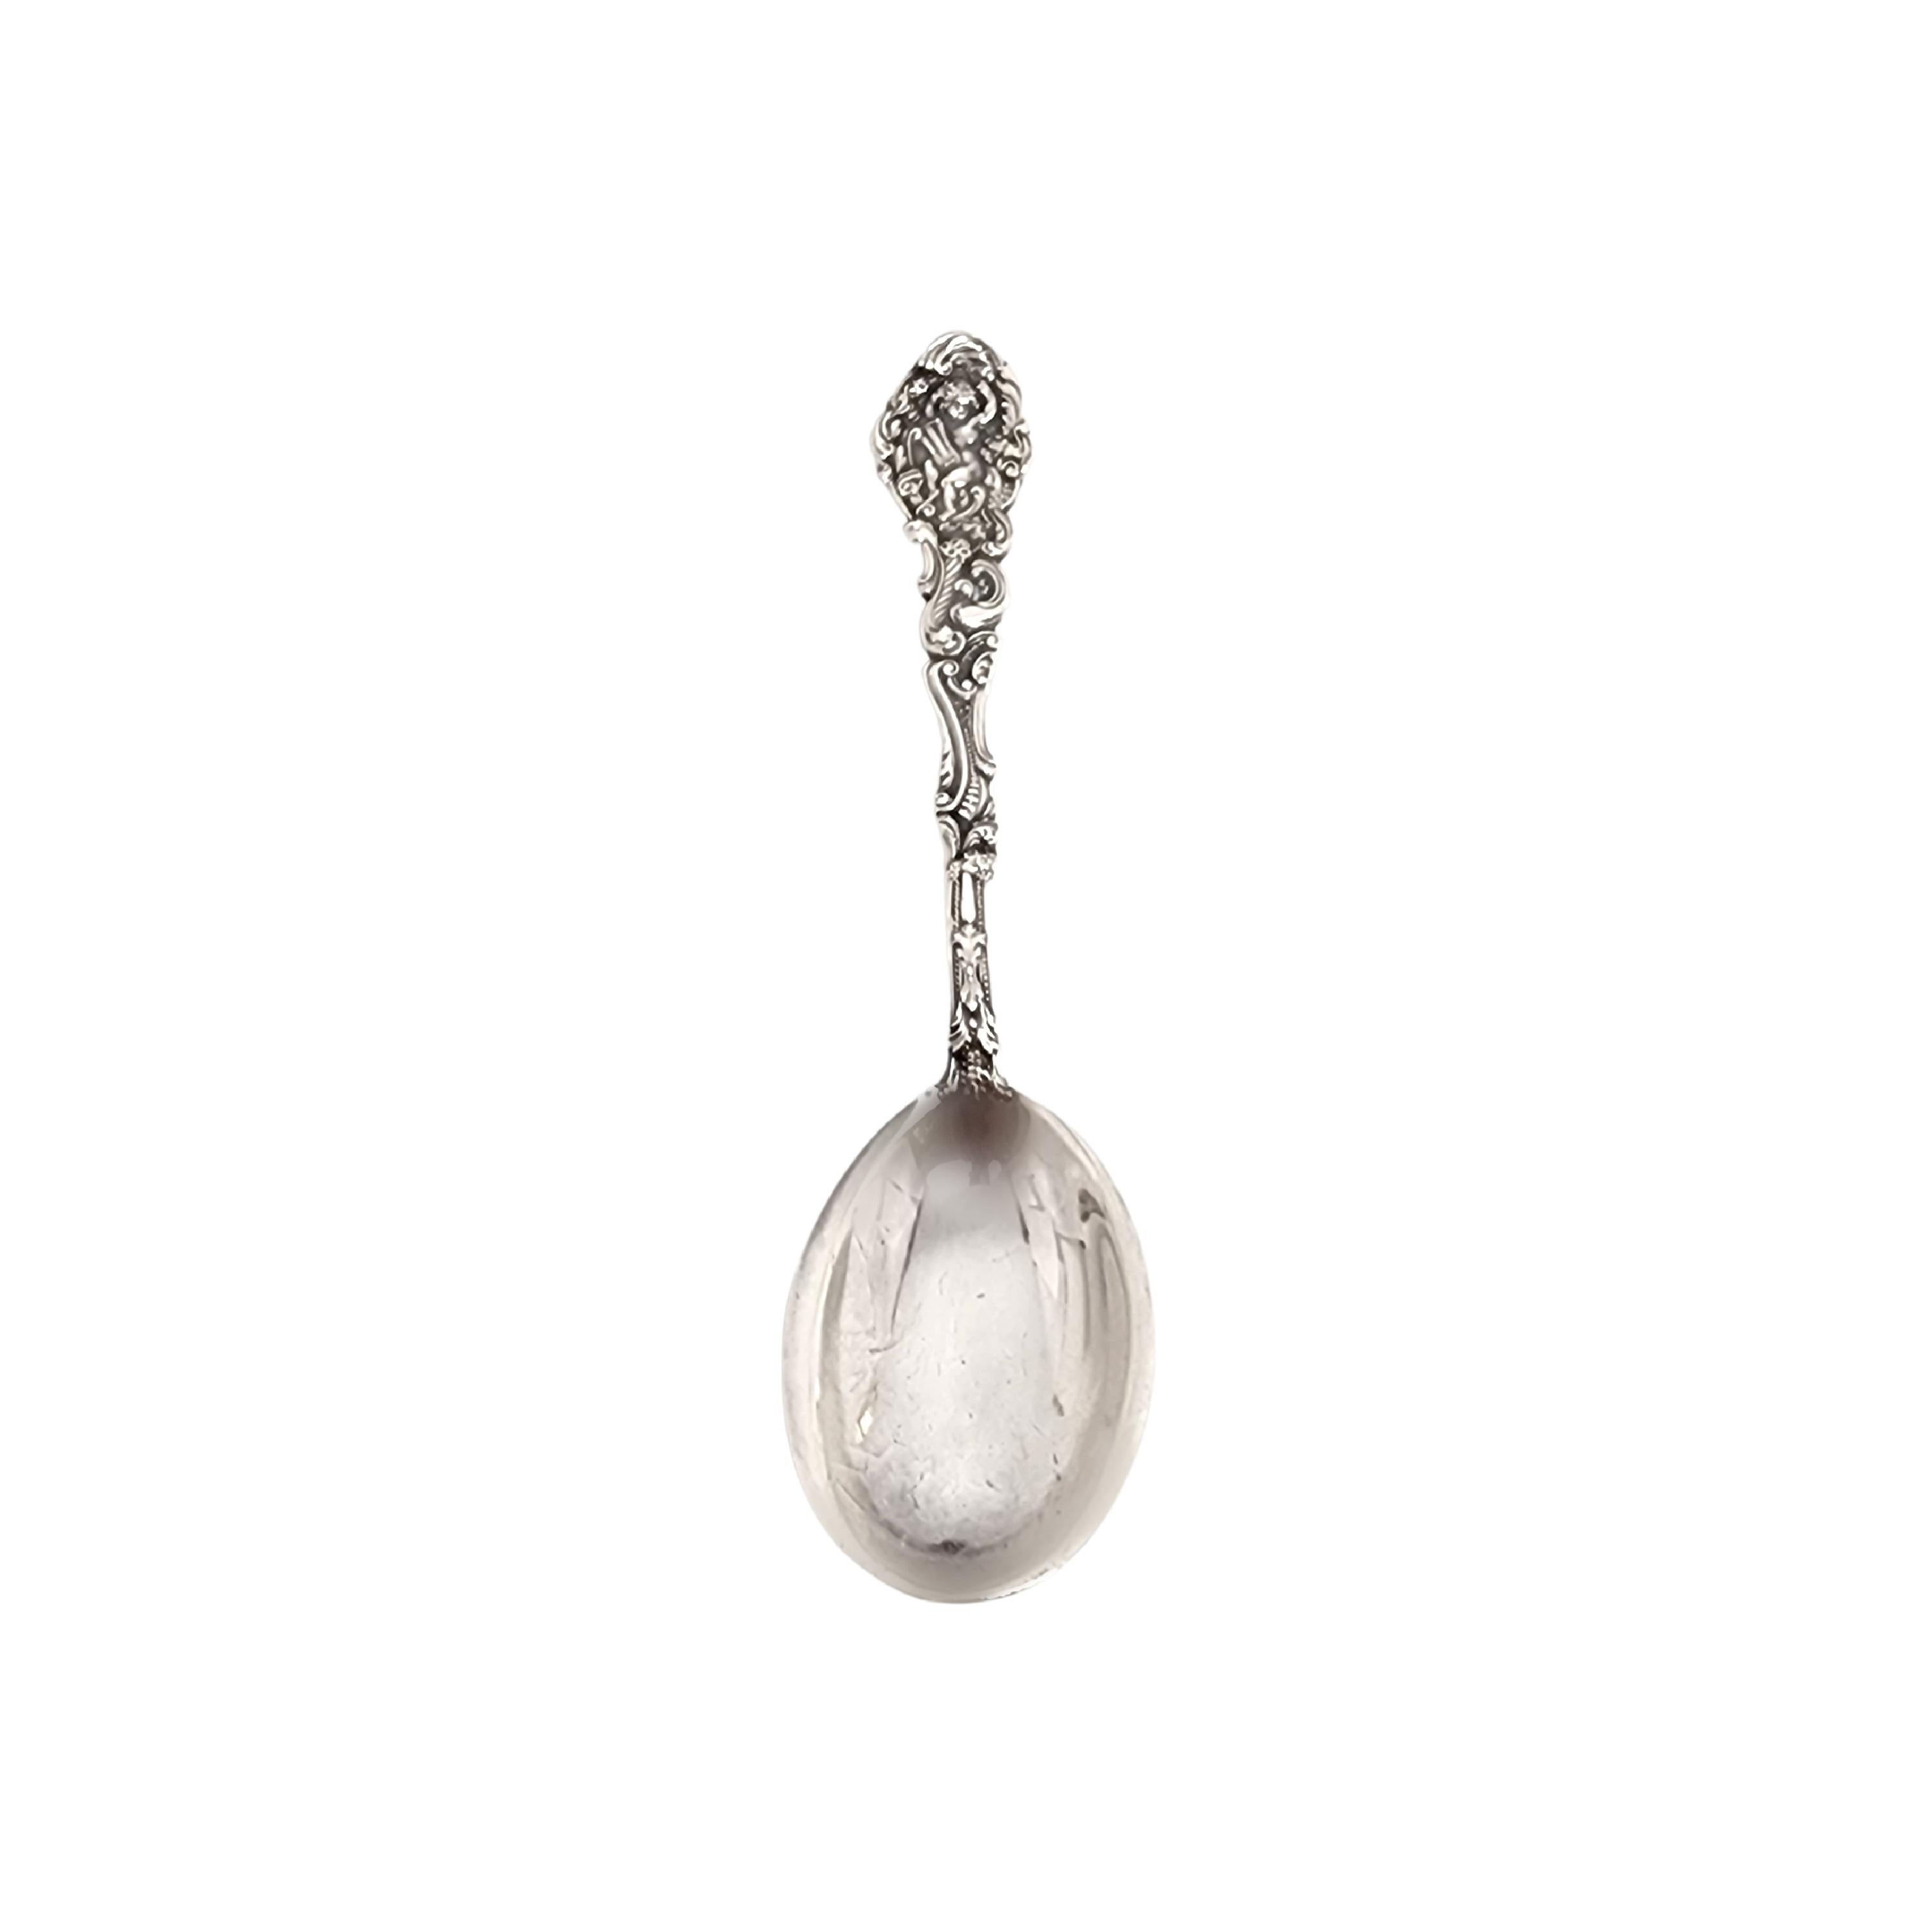 Gorham Versailles Sterling Silver Pap Spoon For Sale 2